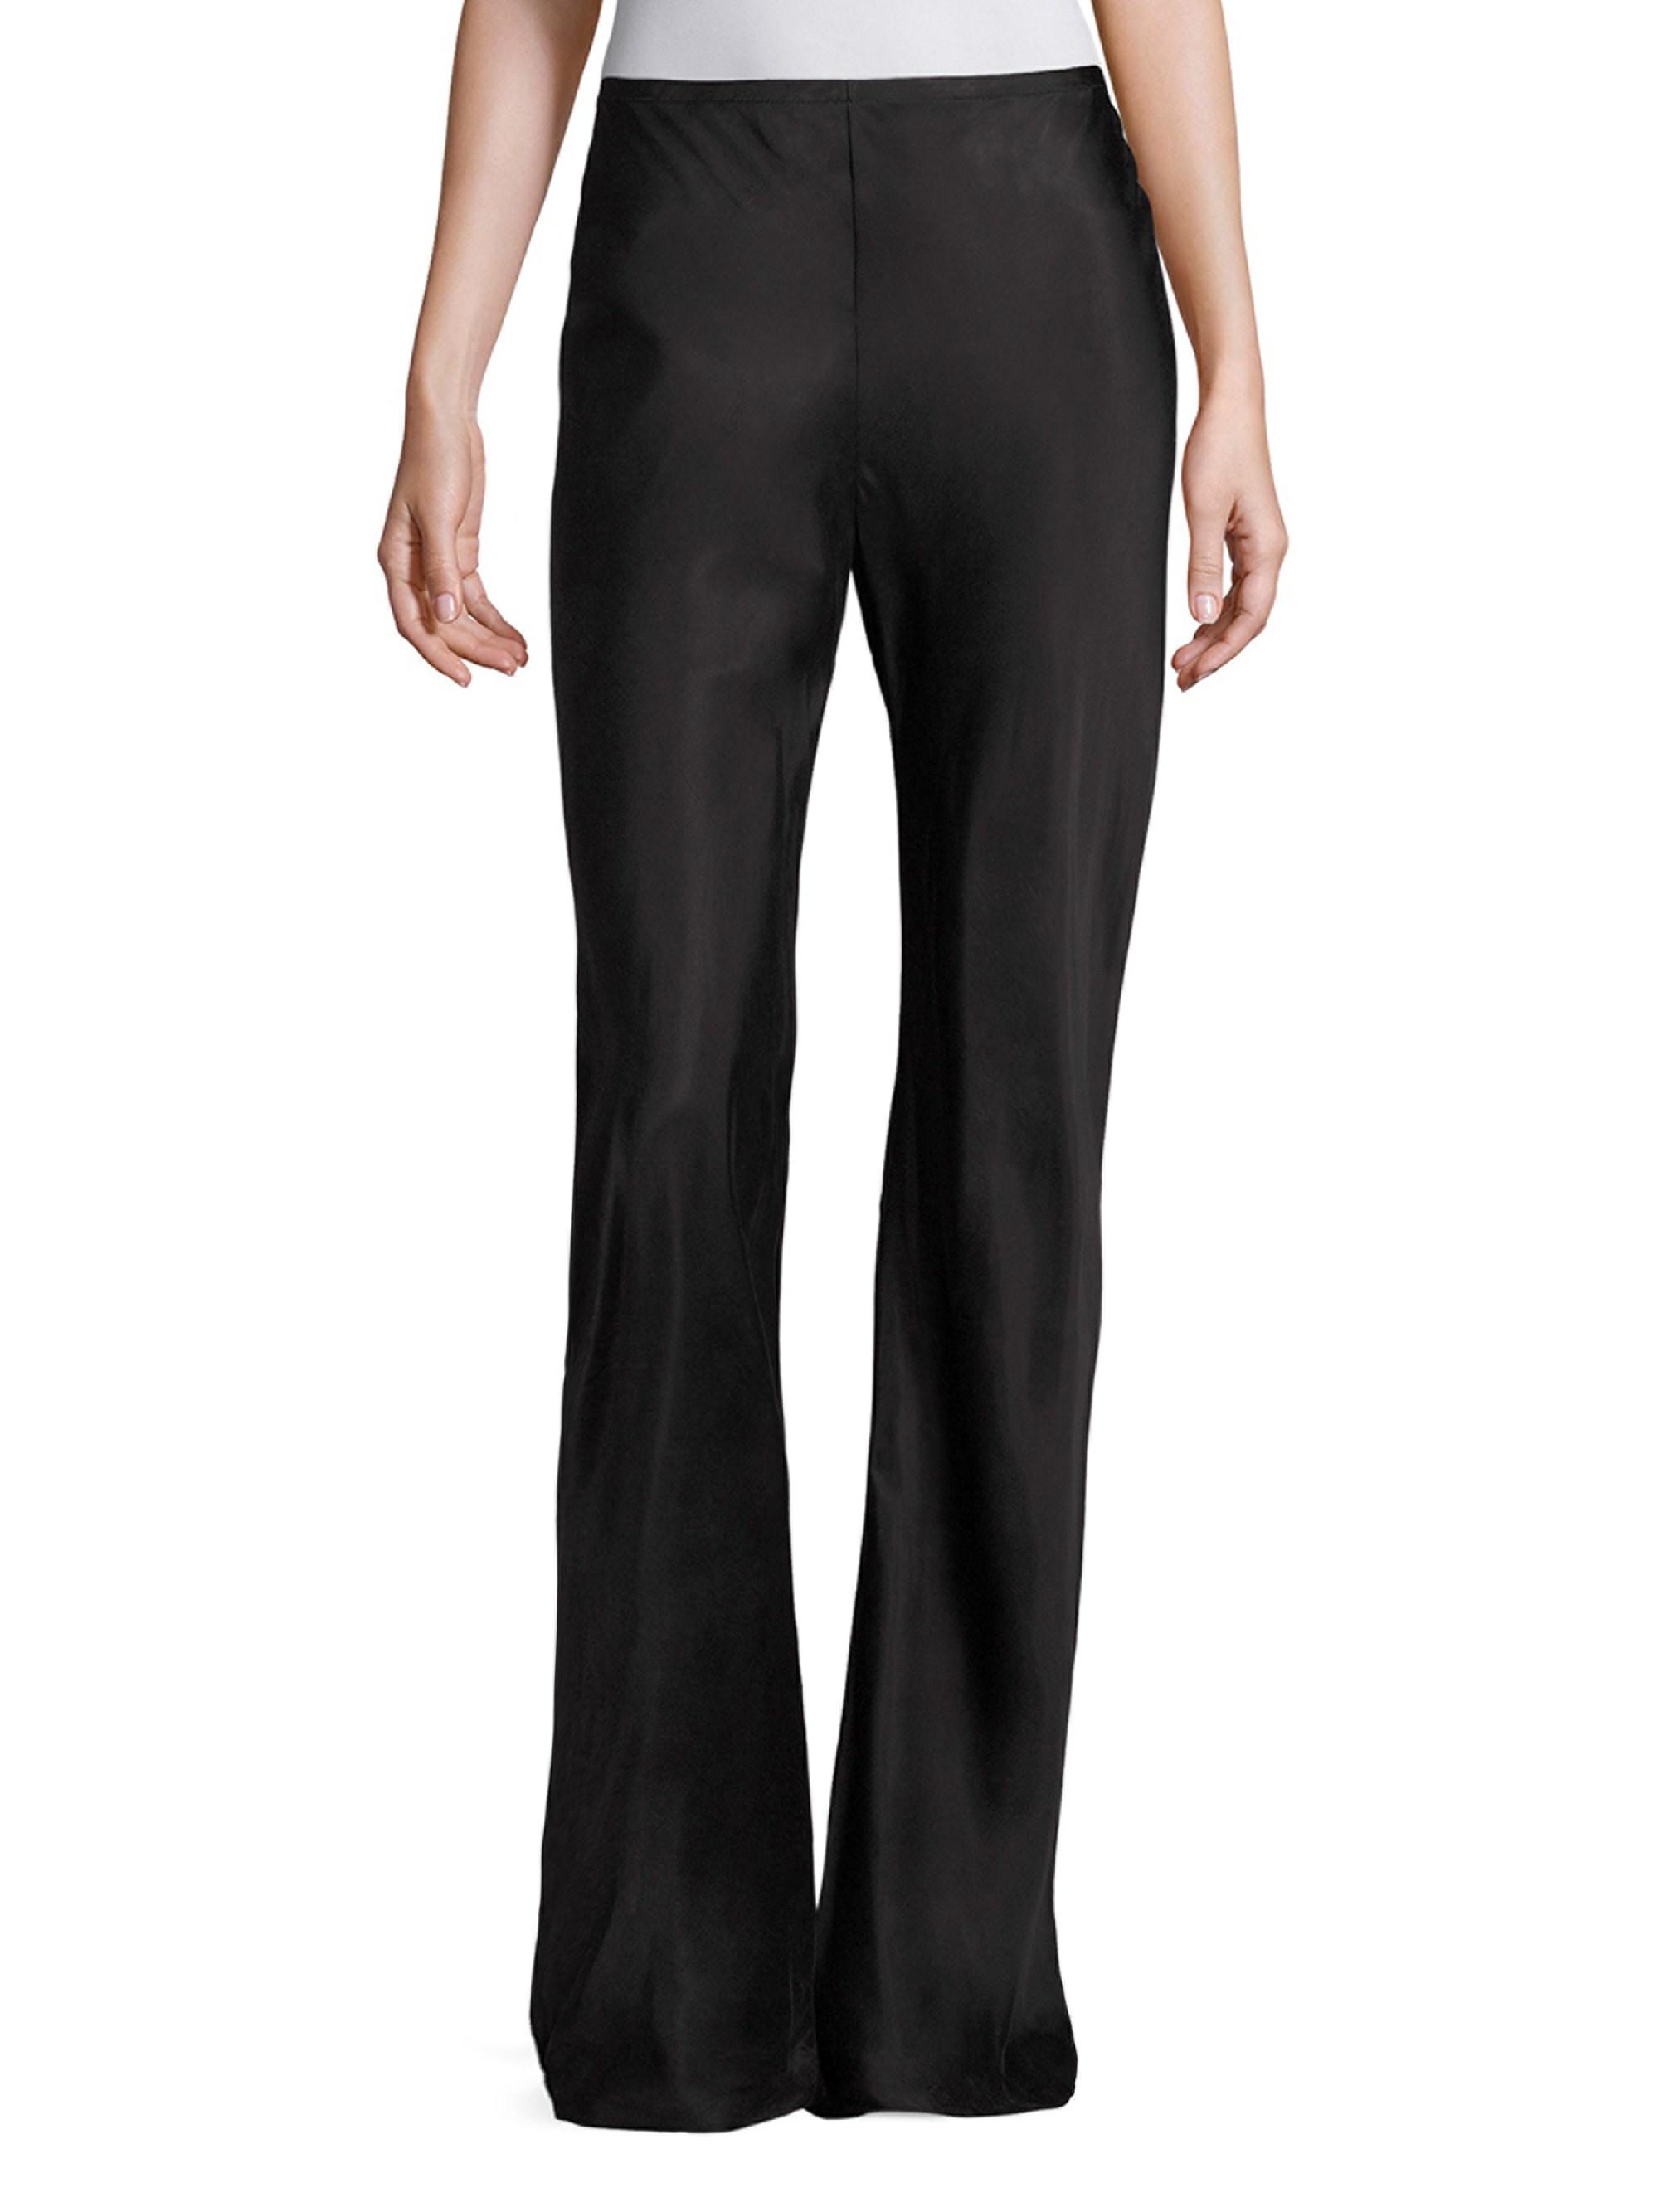 Lyst - The Row Gala Flared Pants in Black